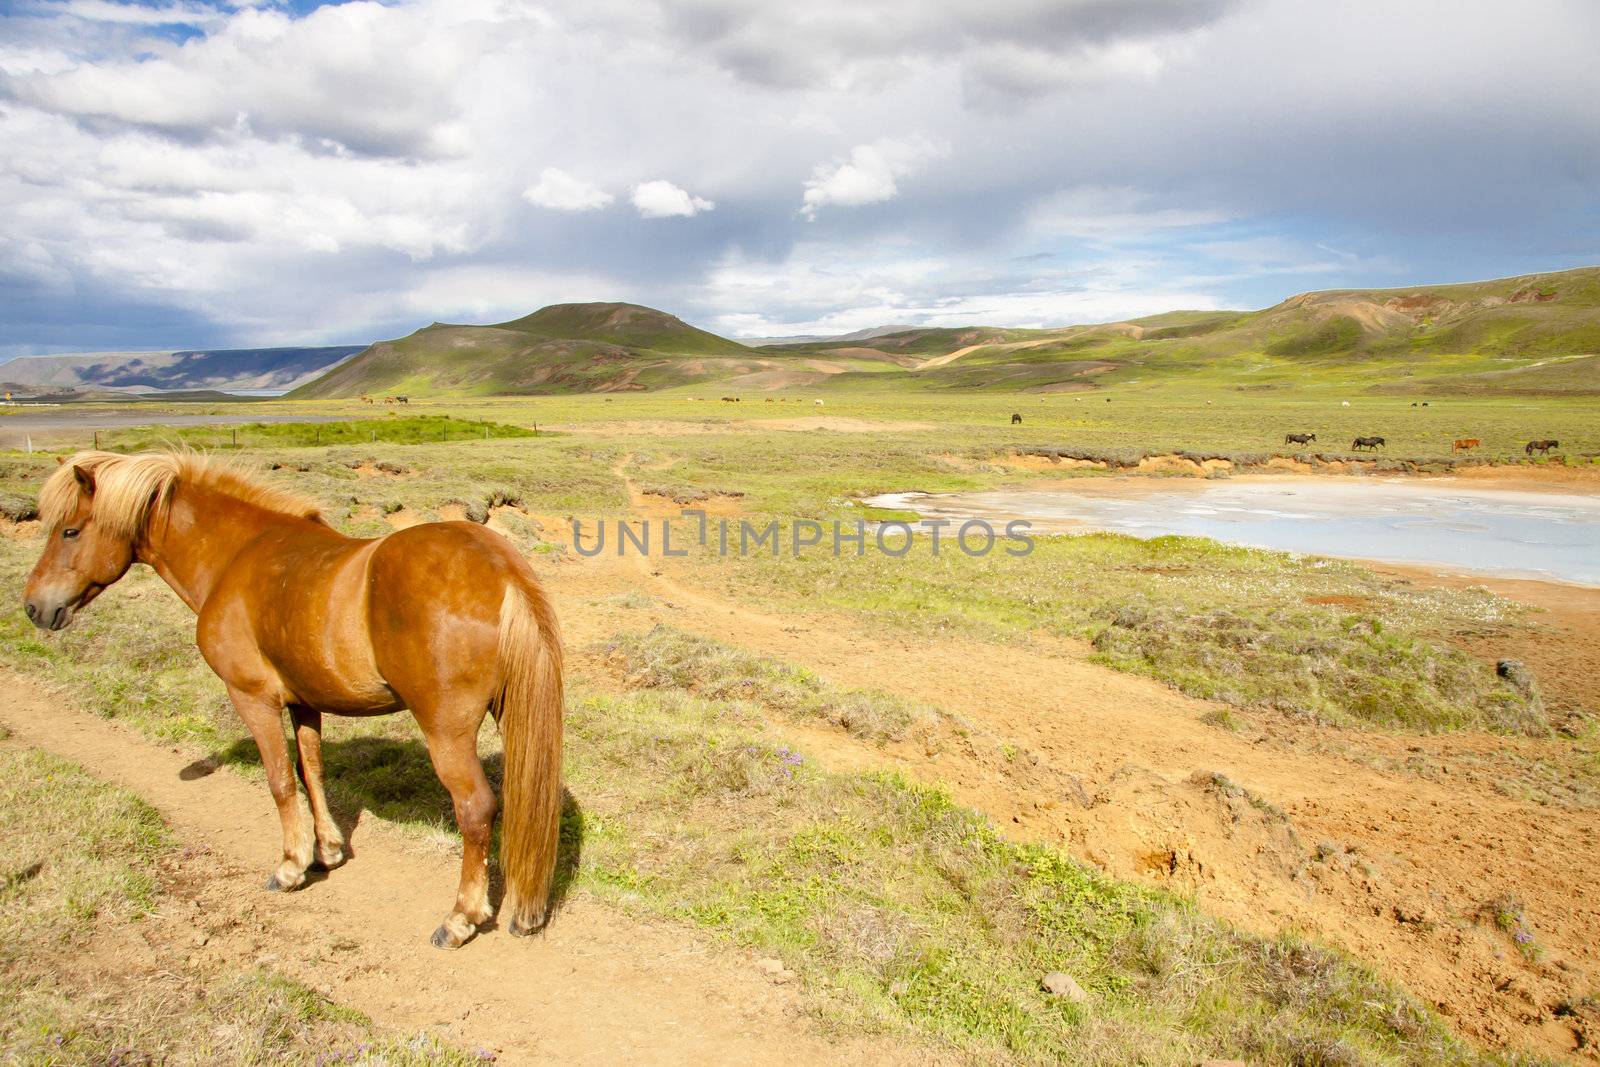 Beauty cloudy landscape and meadow with horses - Iceland.